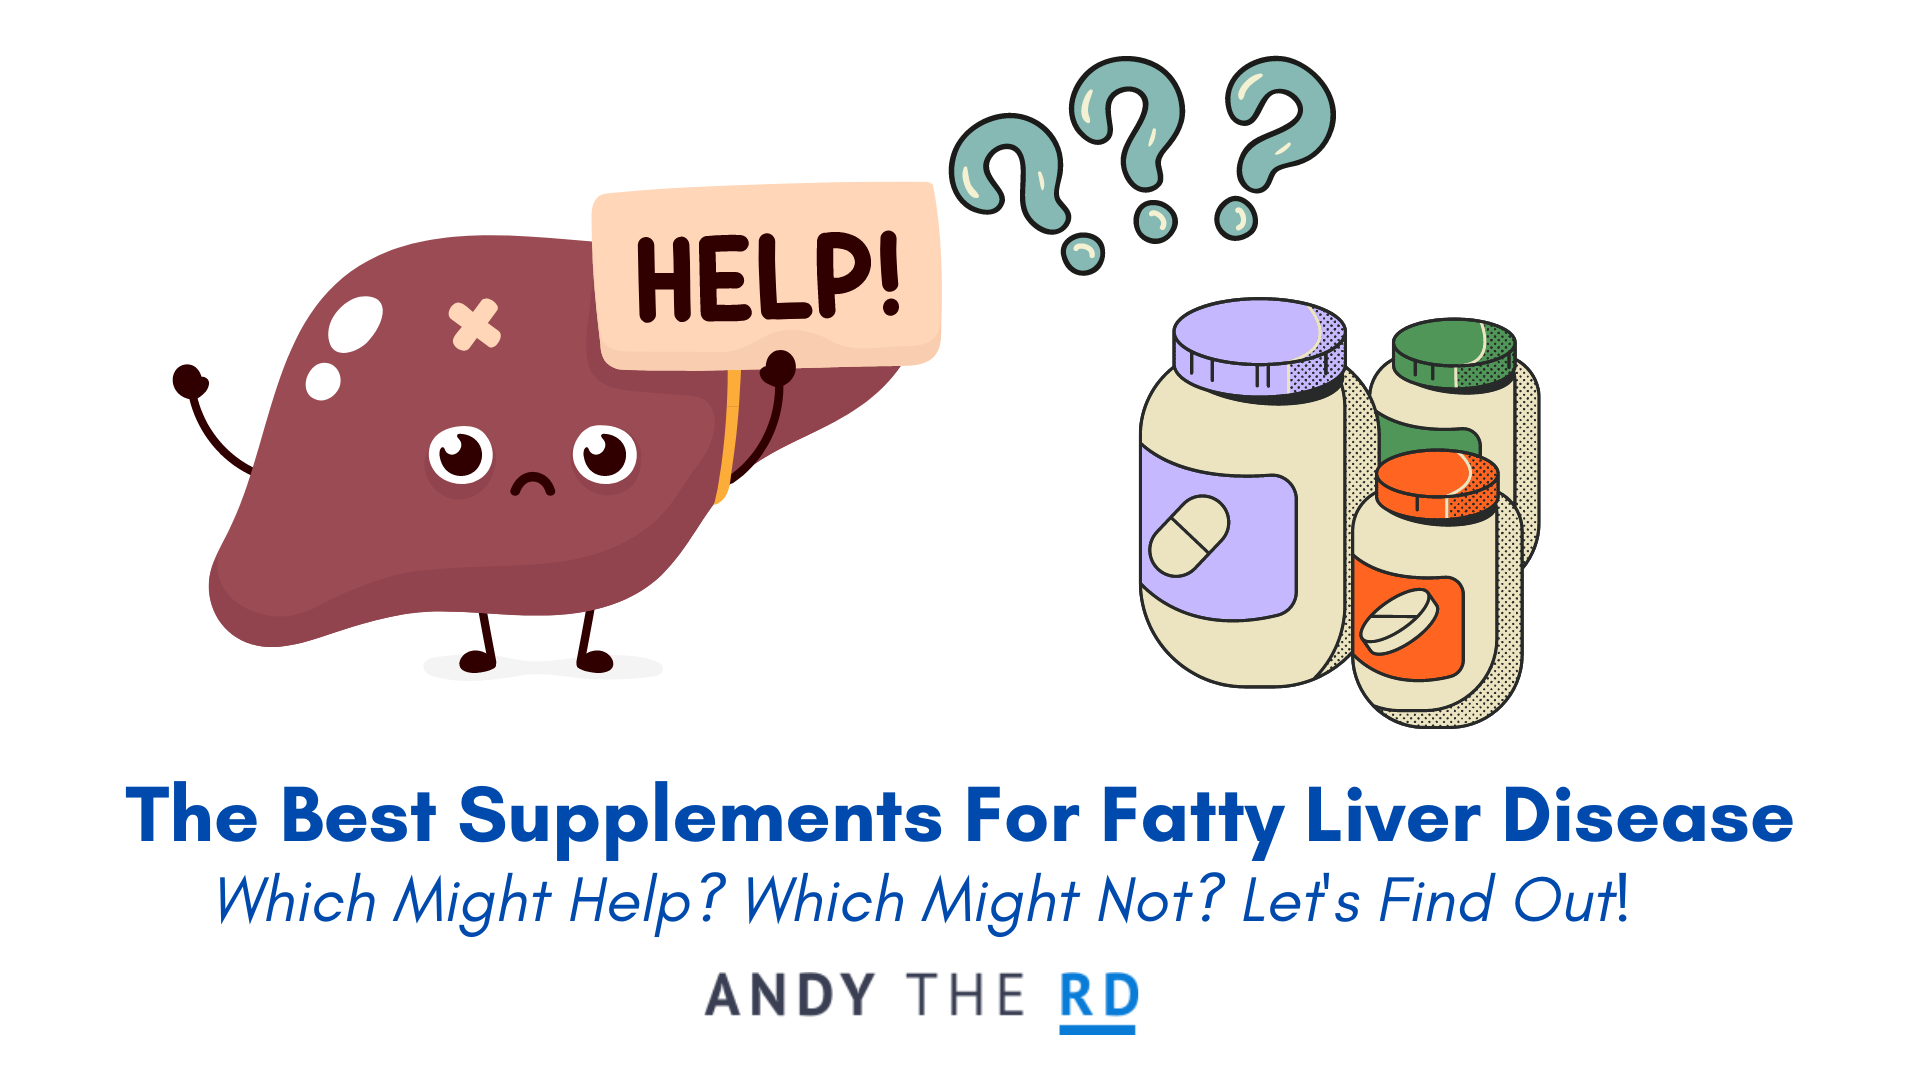 The Best Supplements For Fatty Liver Disease